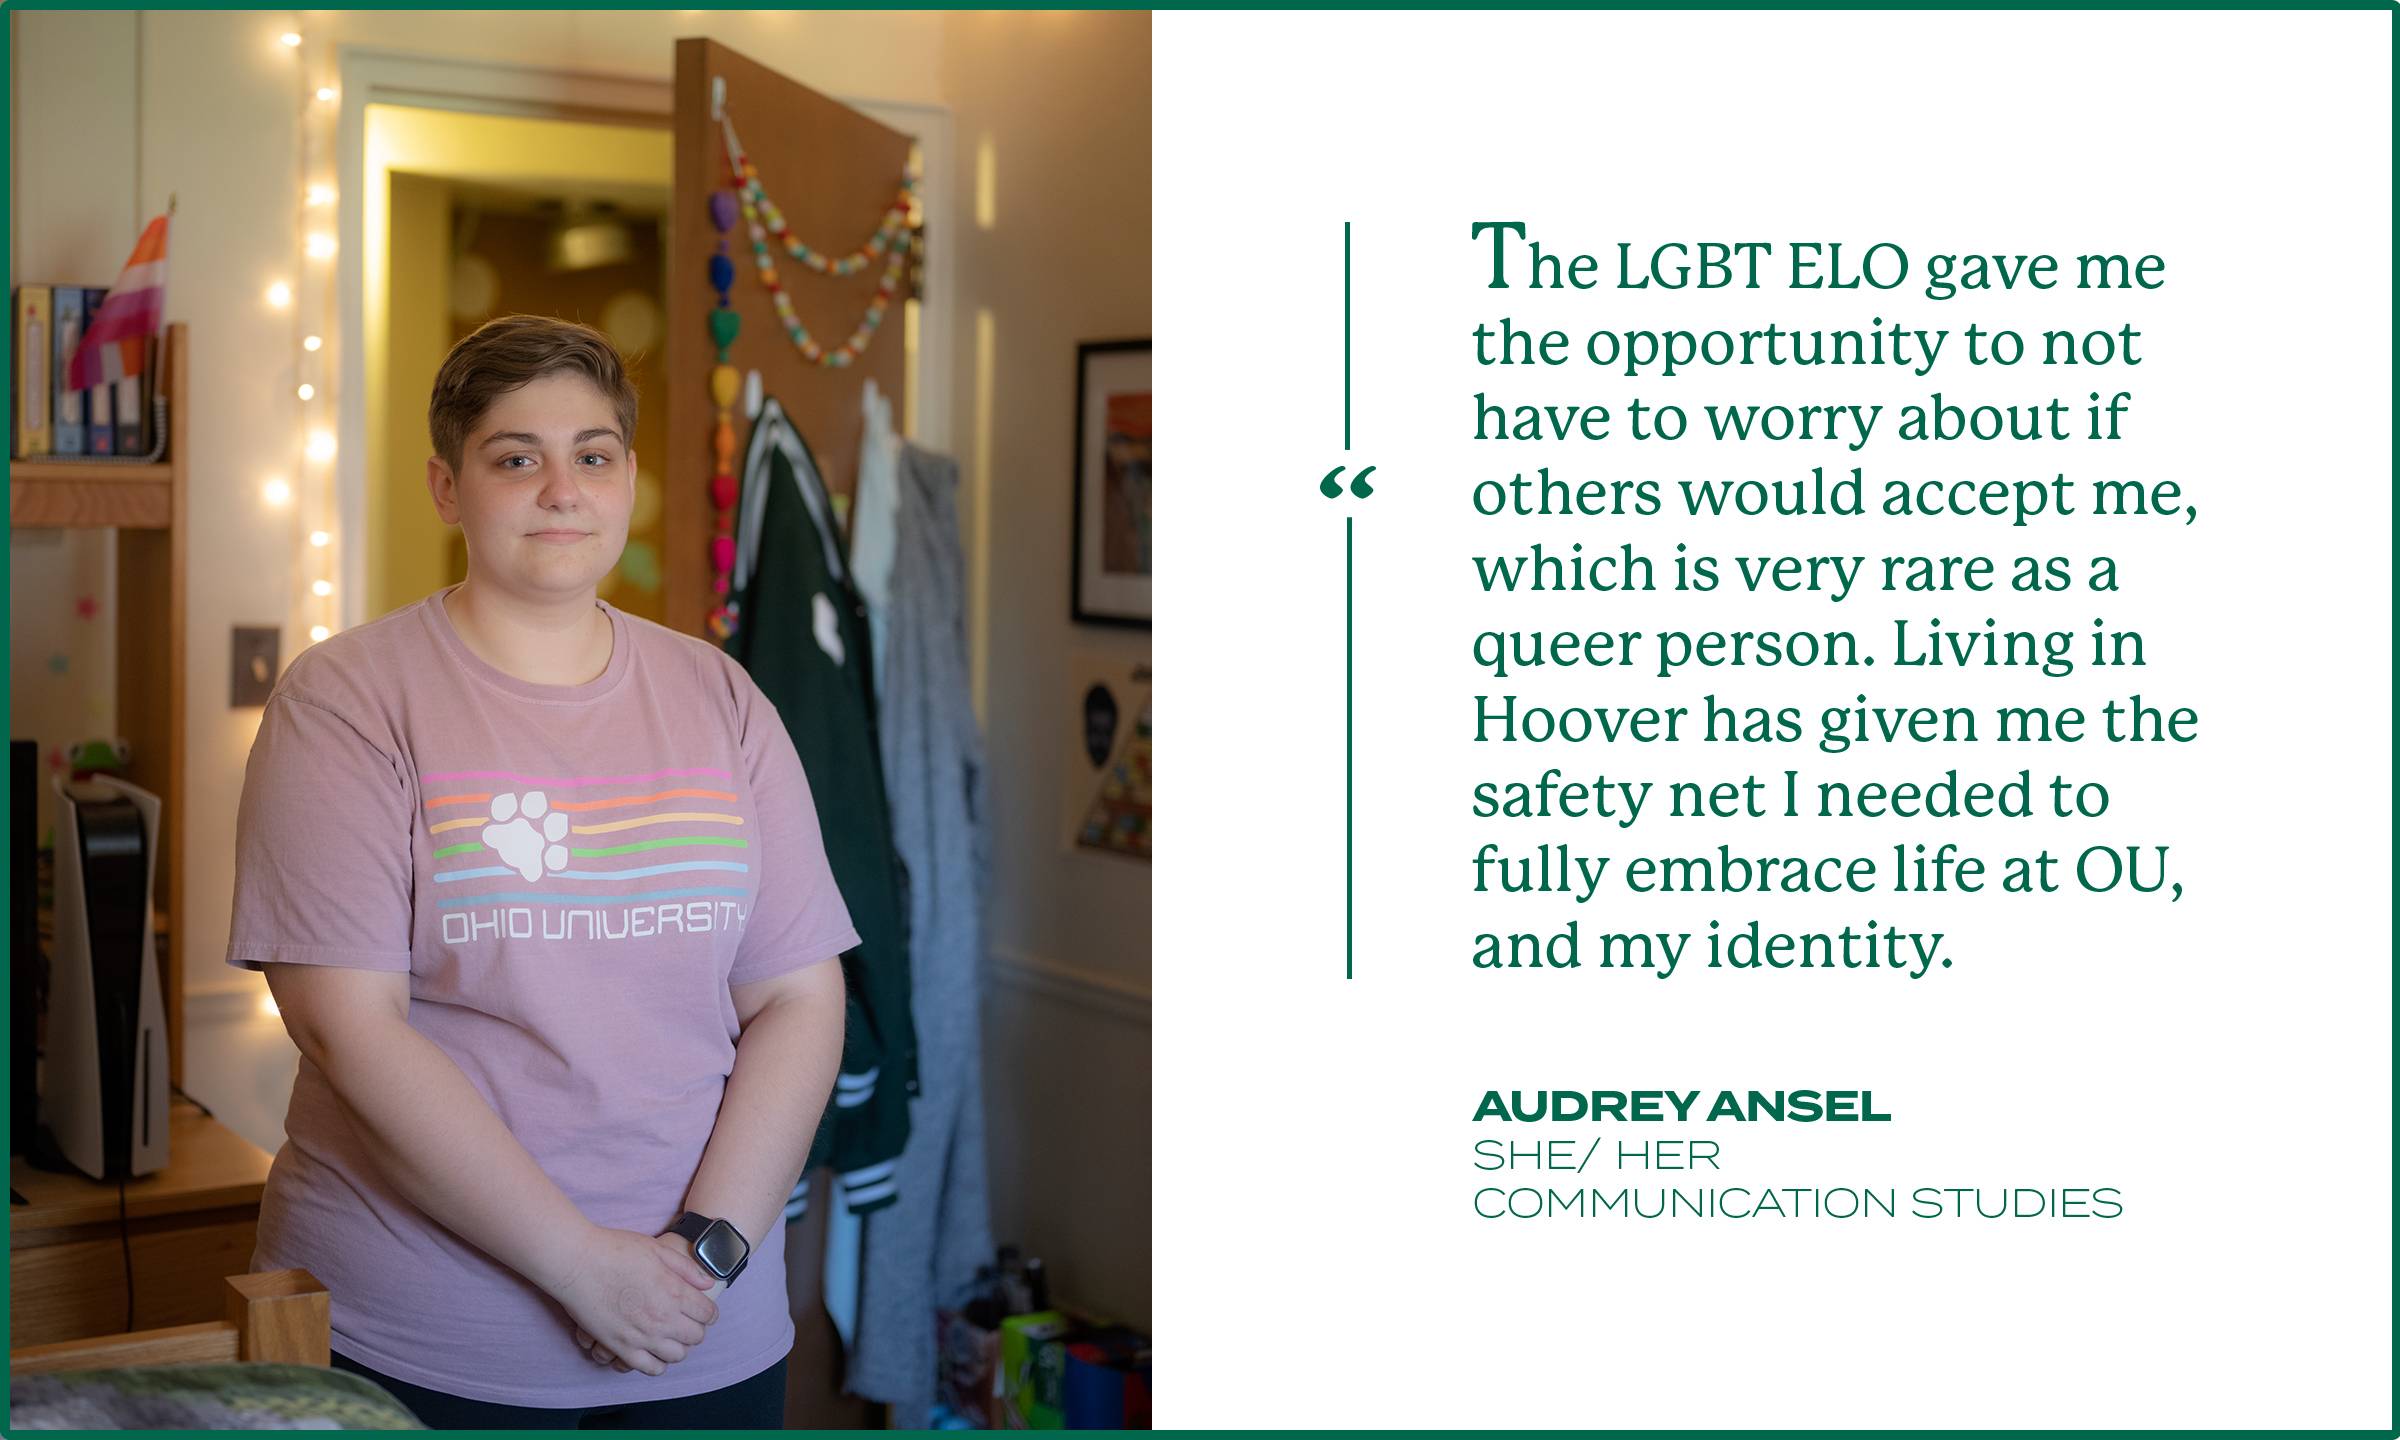 Audrey Ansel (she/her) is a communications studies major